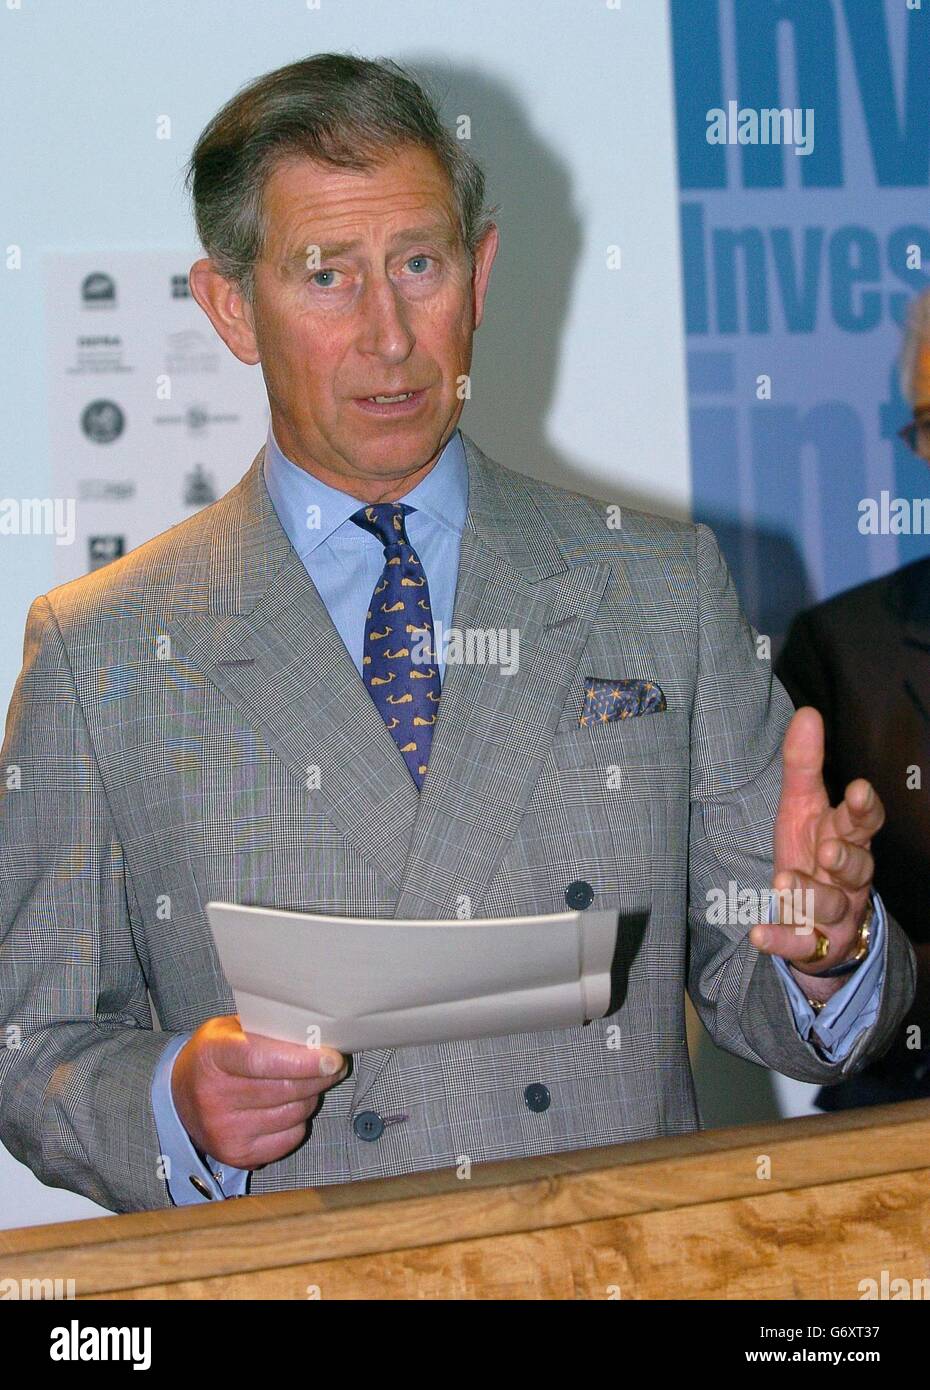 The Prince of Wales speaking during his visit to the National Marine Aquarium in Plymouth, where he met stakeholders involved in the Invest In Fish South West project. His next stop will be Riverford Farm in Buckfastleigh, south Devon, home to an organic food business, Riverford Organic Vegetables. Stock Photo